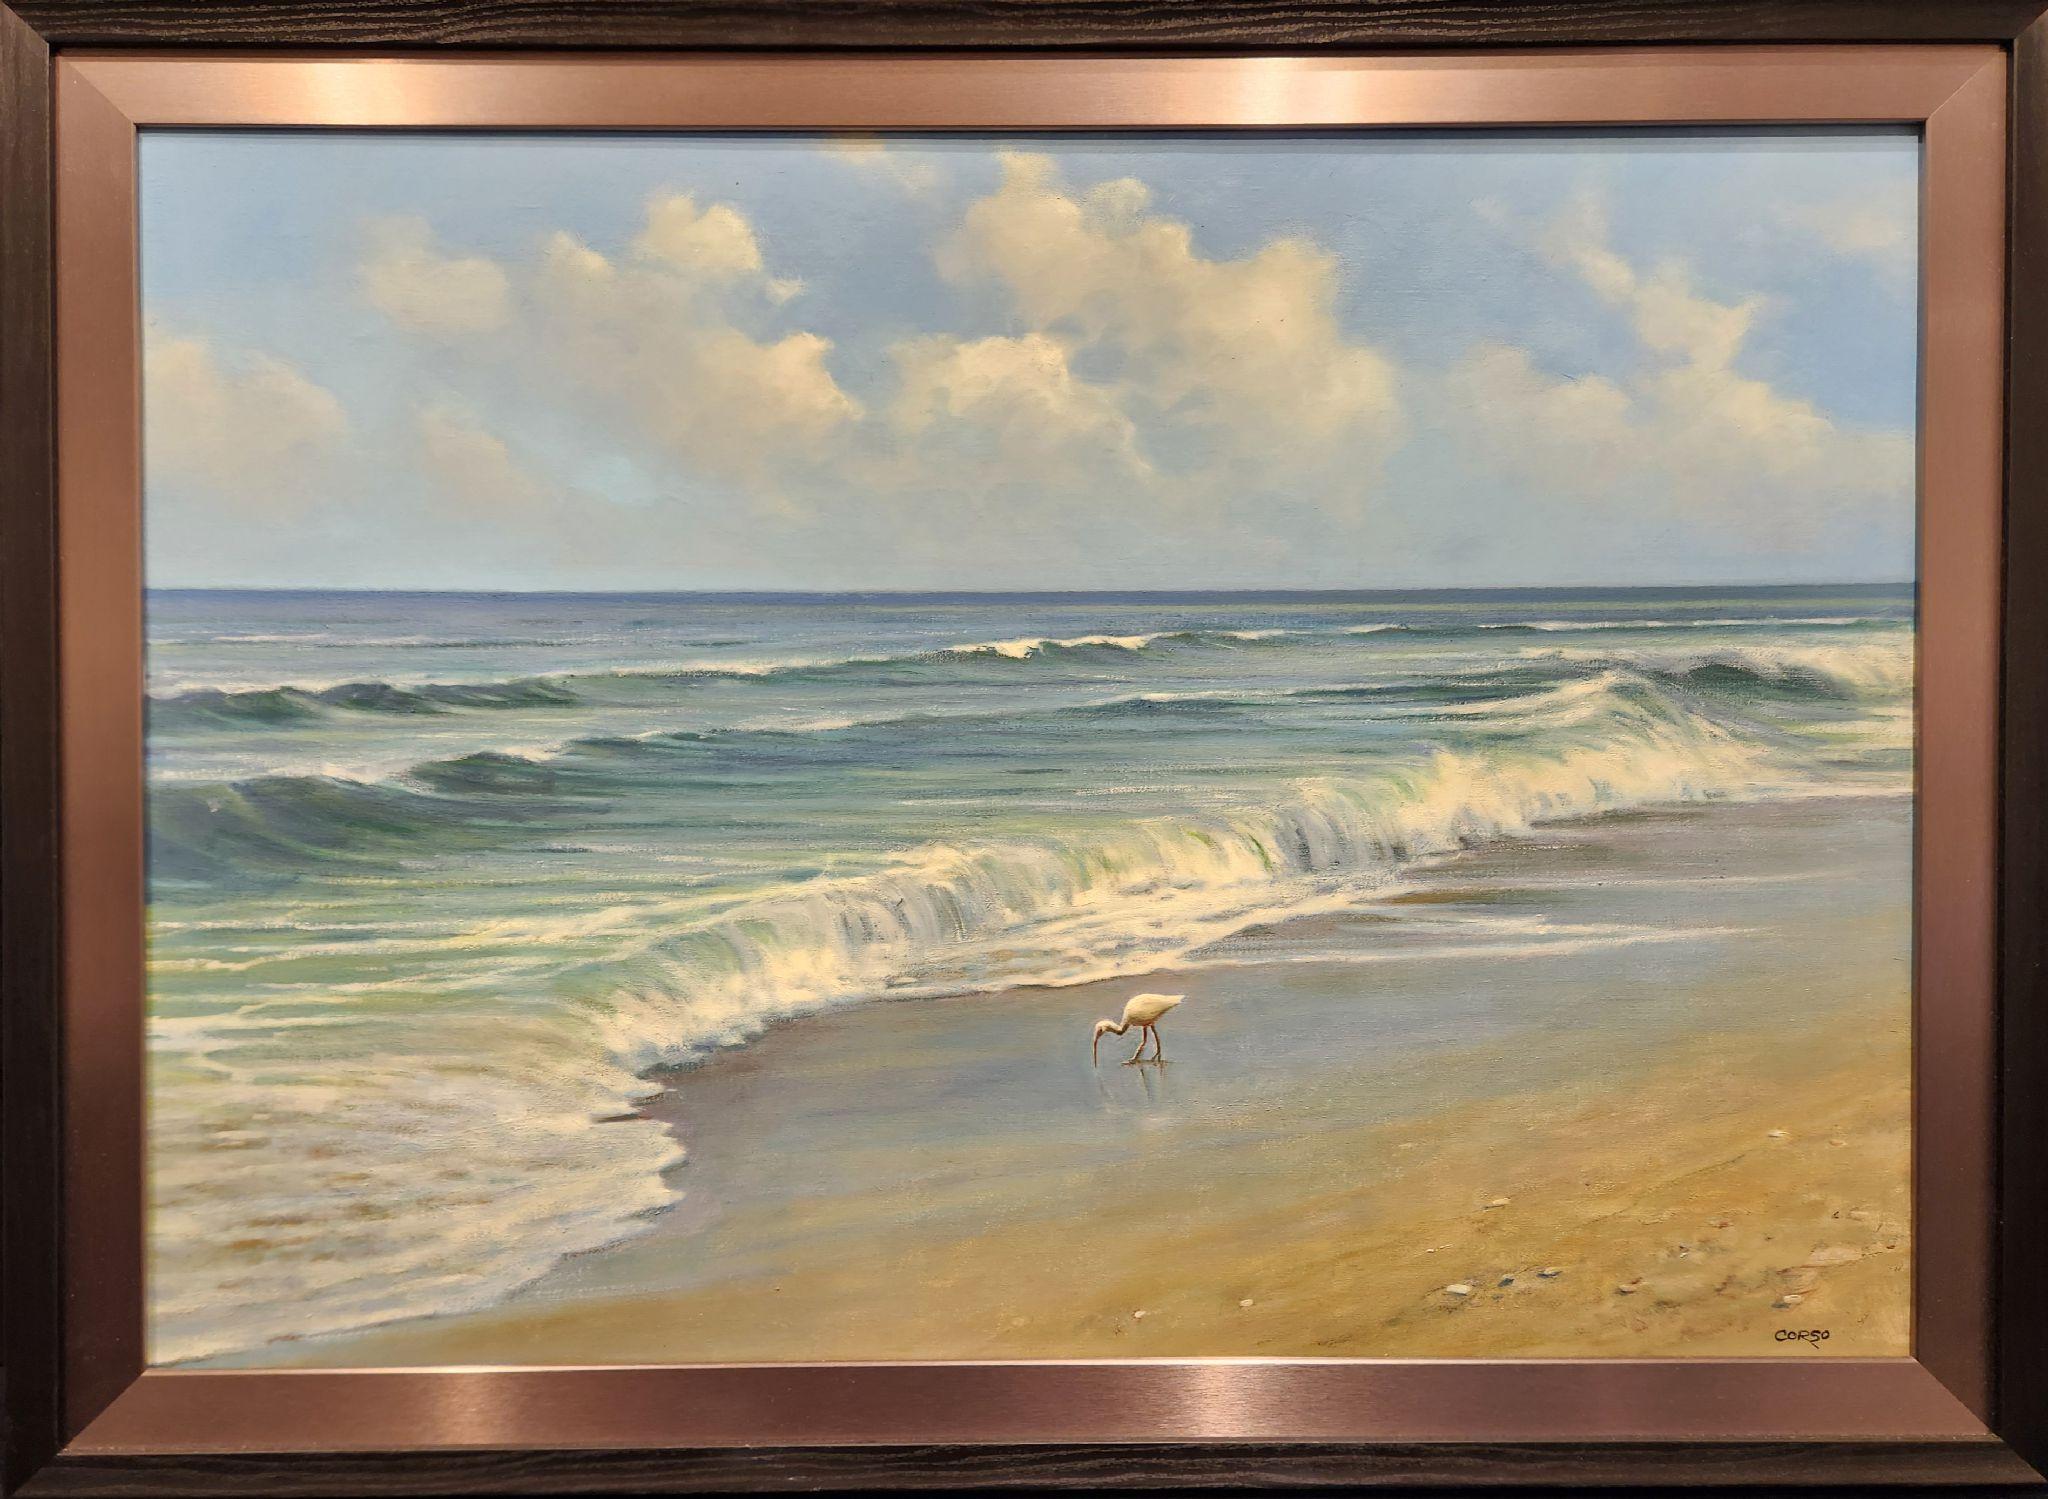 Along the Surf - Painting by Frank Corso